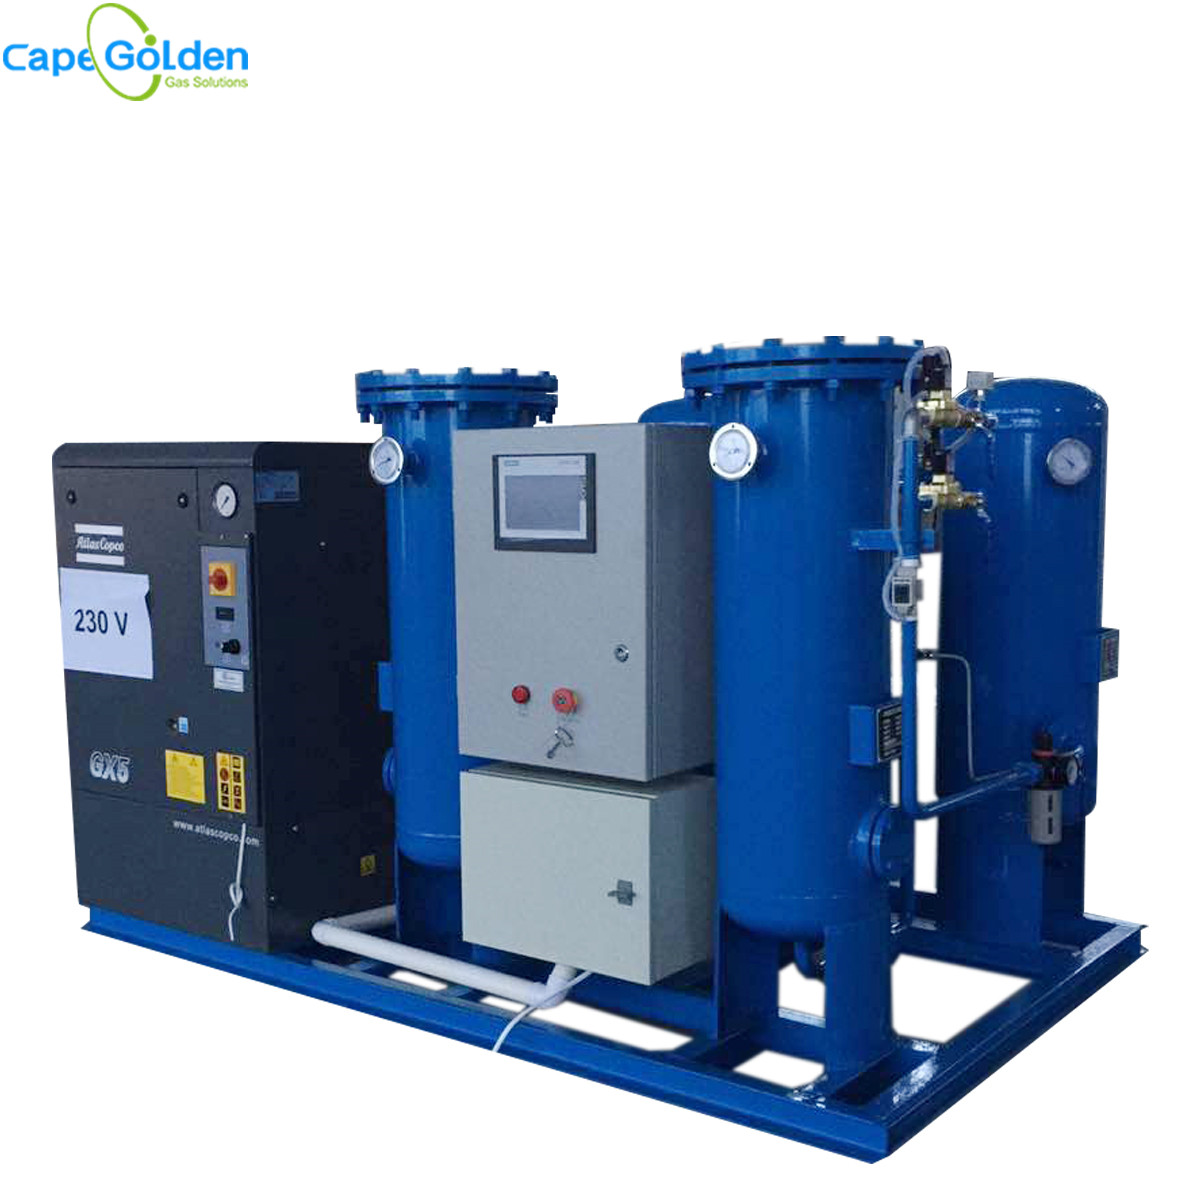 2019 Good Quality O2 Machine -
 Integrated oxygen generator for filling cylinders – Cape Golden